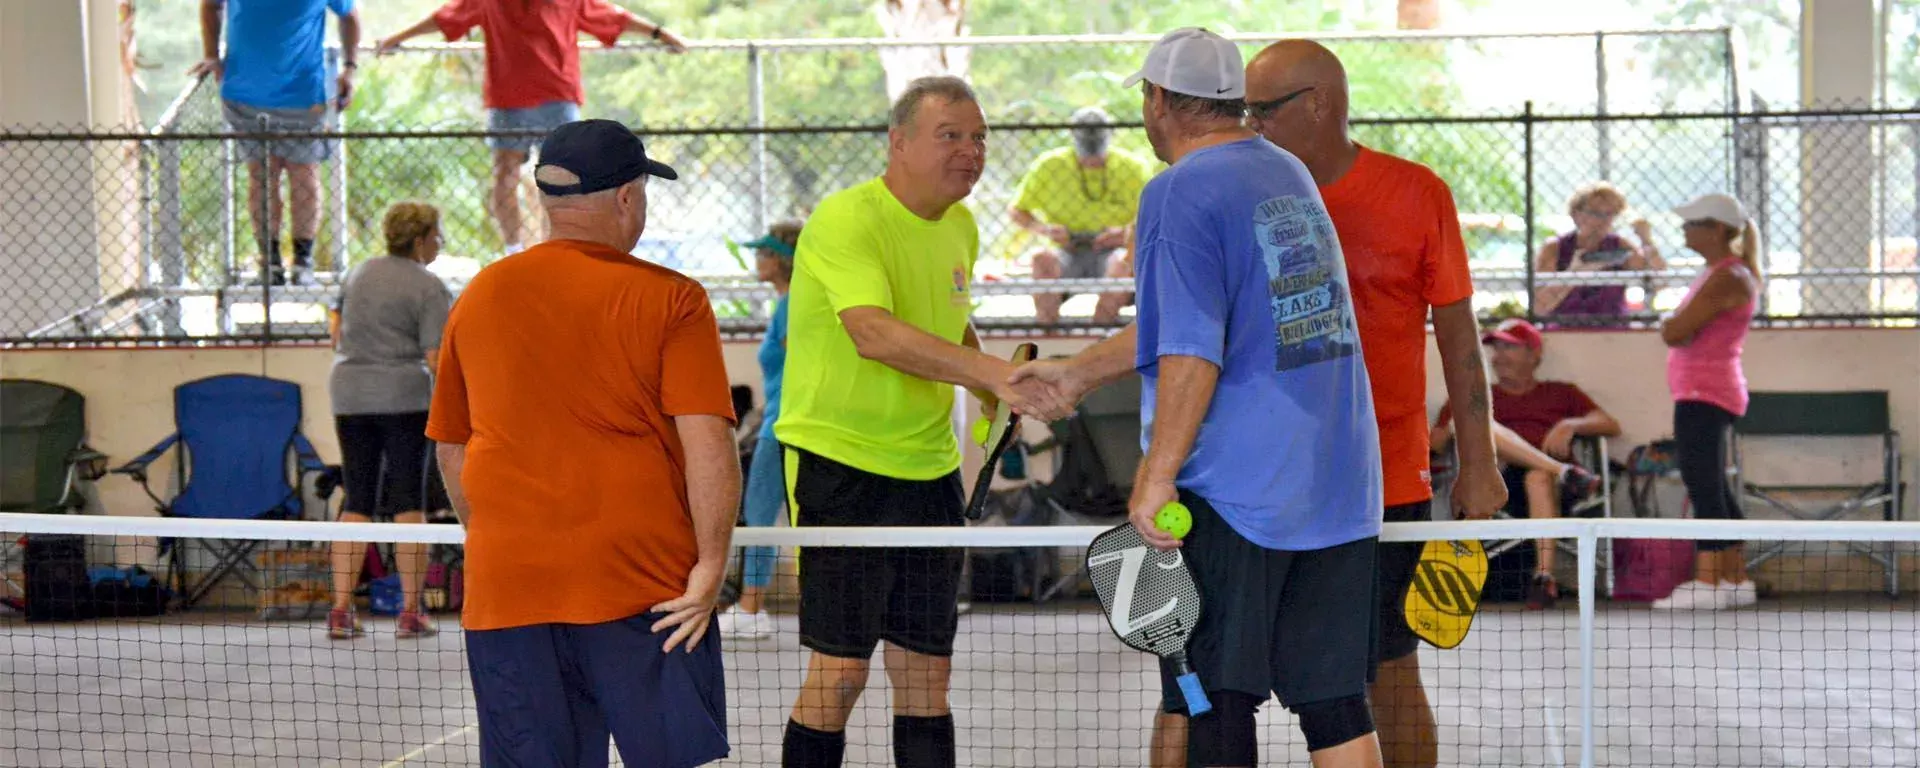 Pickleball game with men